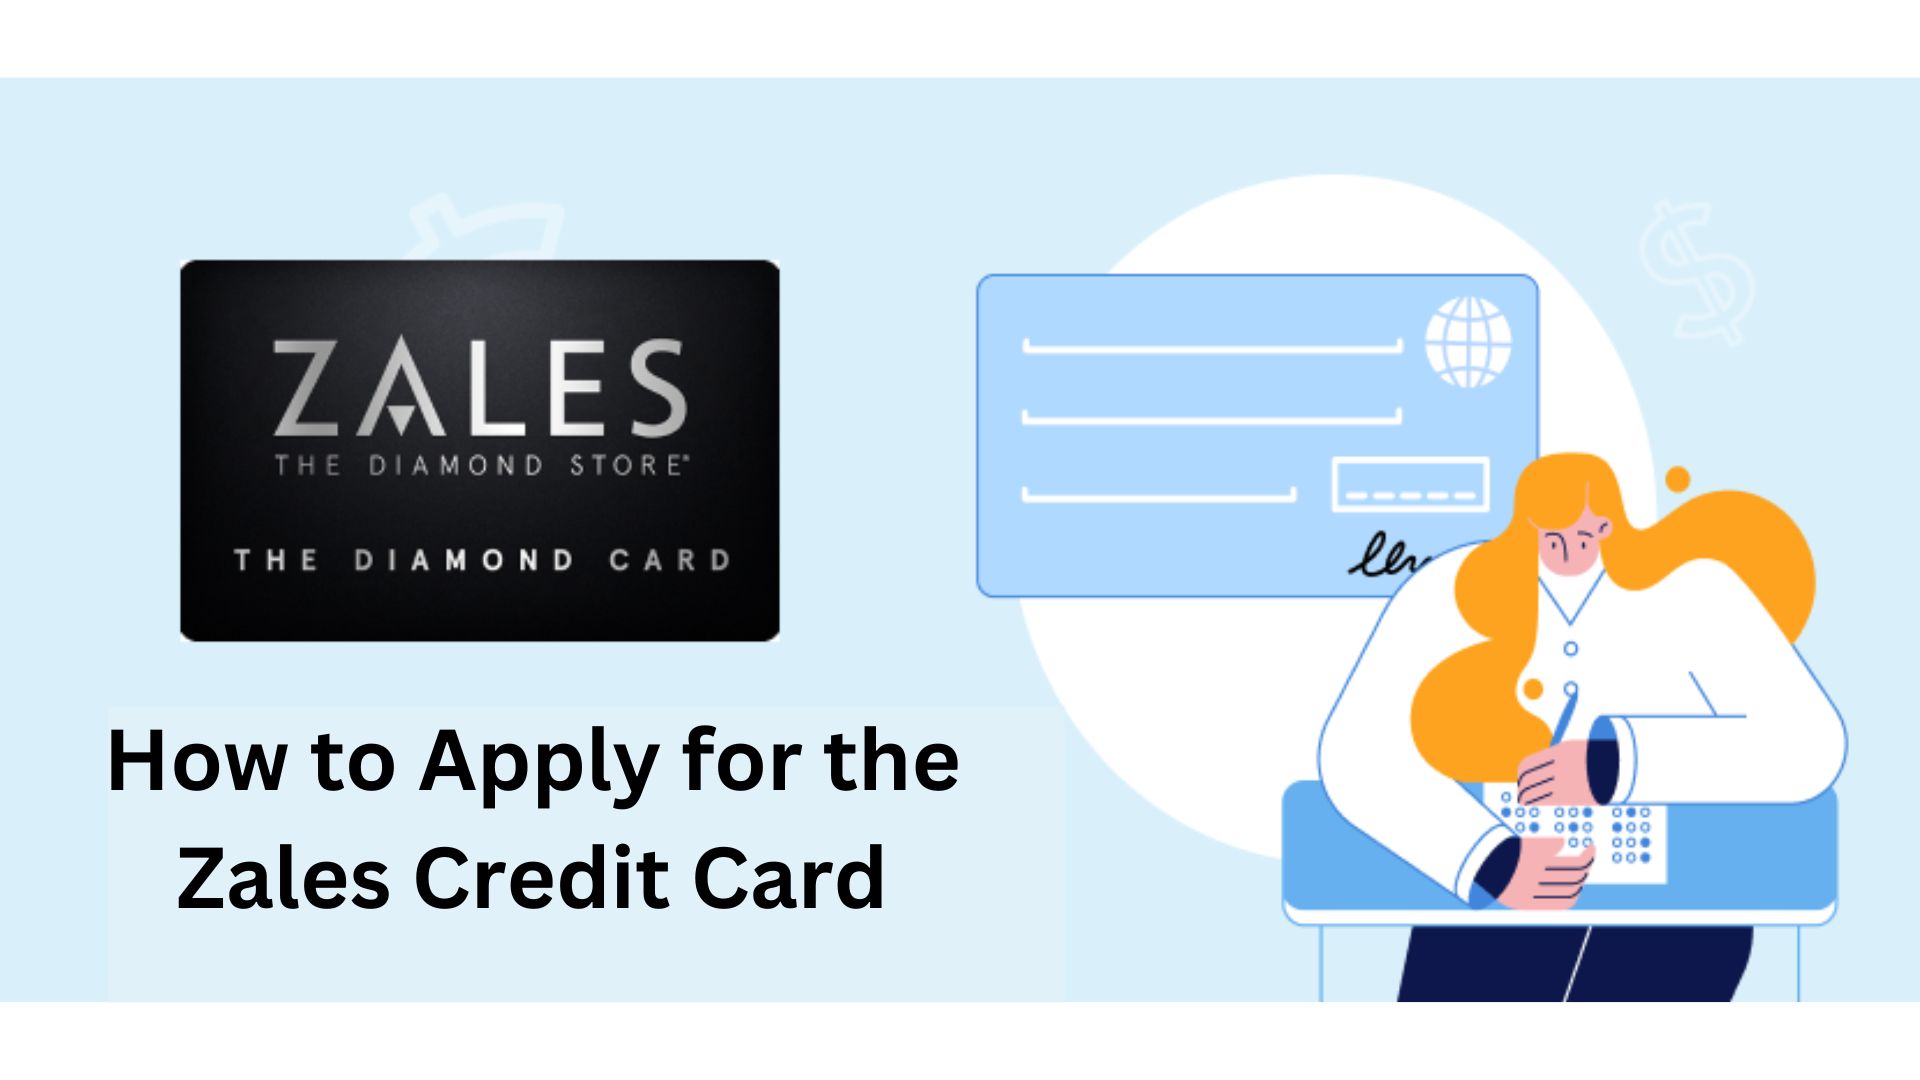 How to Apply for the Zales Credit Card